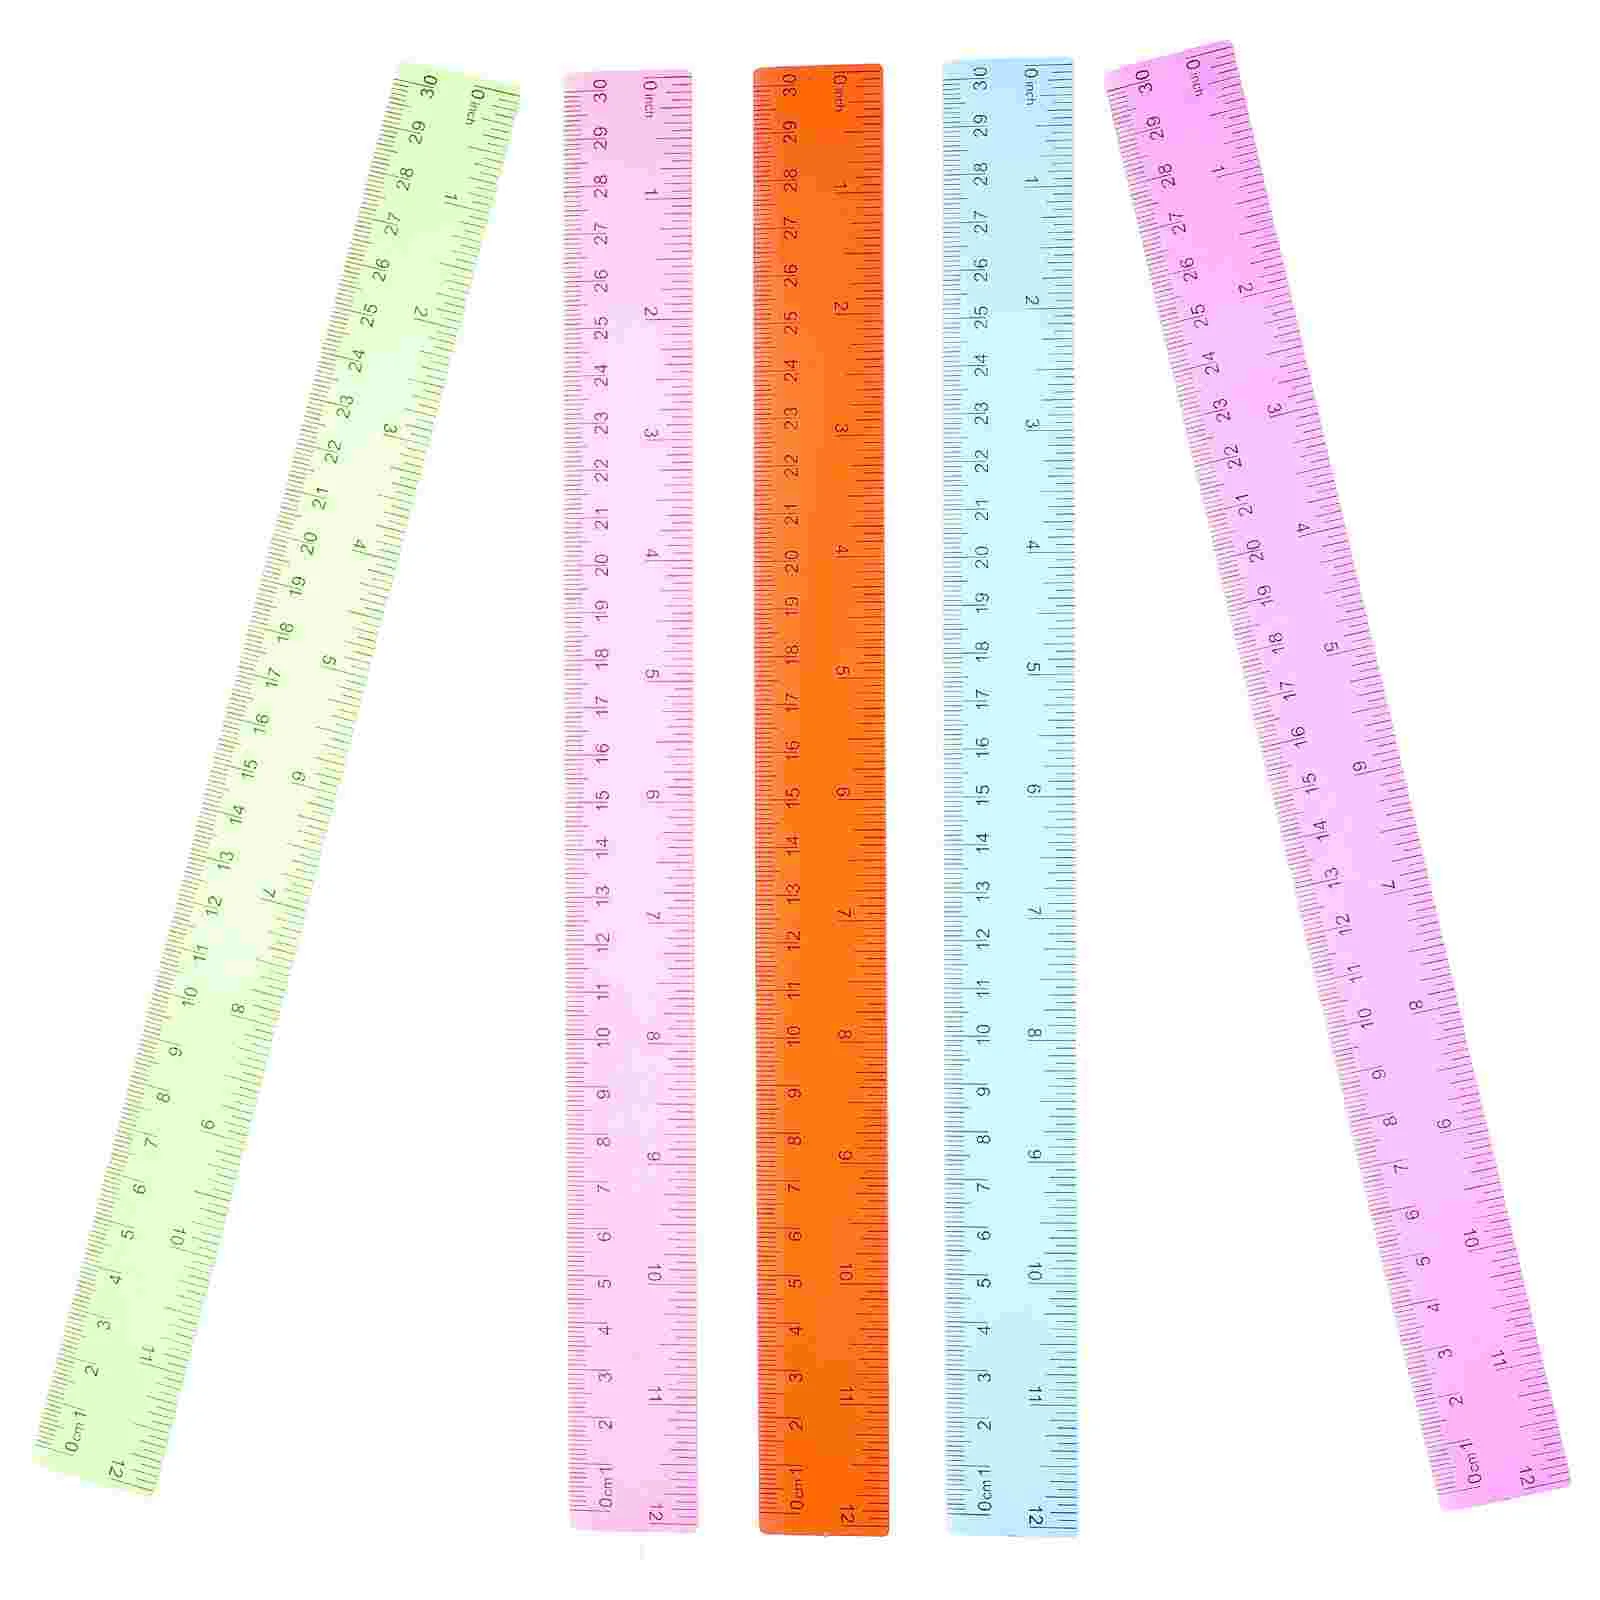 

5 Pcs Creative Plastic Ruler Novelty Colored Rulers Portable Students Straight Measuring with Centimeters